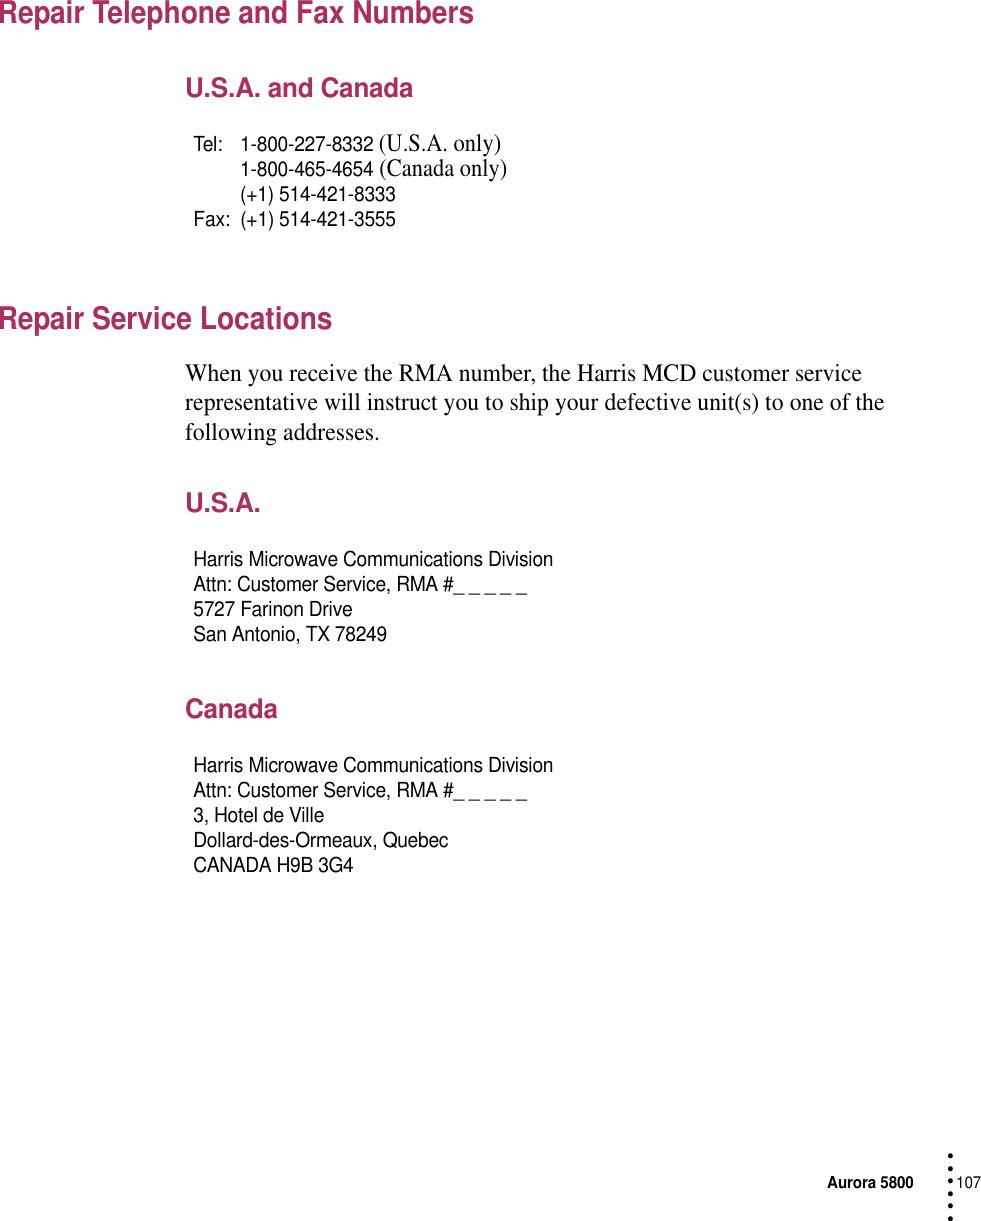 Aurora 5800107 • • • •••Repair Telephone and Fax Numbers U.S.A. and CanadaRepair Service LocationsWhen you receive the RMA number, the Harris MCD customer service representative will instruct you to ship your defective unit(s) to one of the following addresses.U.S.A.CanadaTel: 1-800-227-8332 (U.S.A. only)1-800-465-4654 (Canada only)(+1) 514-421-8333Fax: (+1) 514-421-3555Harris Microwave Communications DivisionAttn: Customer Service, RMA #_ _ _ _ _5727 Farinon DriveSan Antonio, TX 78249Harris Microwave Communications DivisionAttn: Customer Service, RMA #_ _ _ _ _3, Hotel de VilleDollard-des-Ormeaux, QuebecCANADA H9B 3G4 